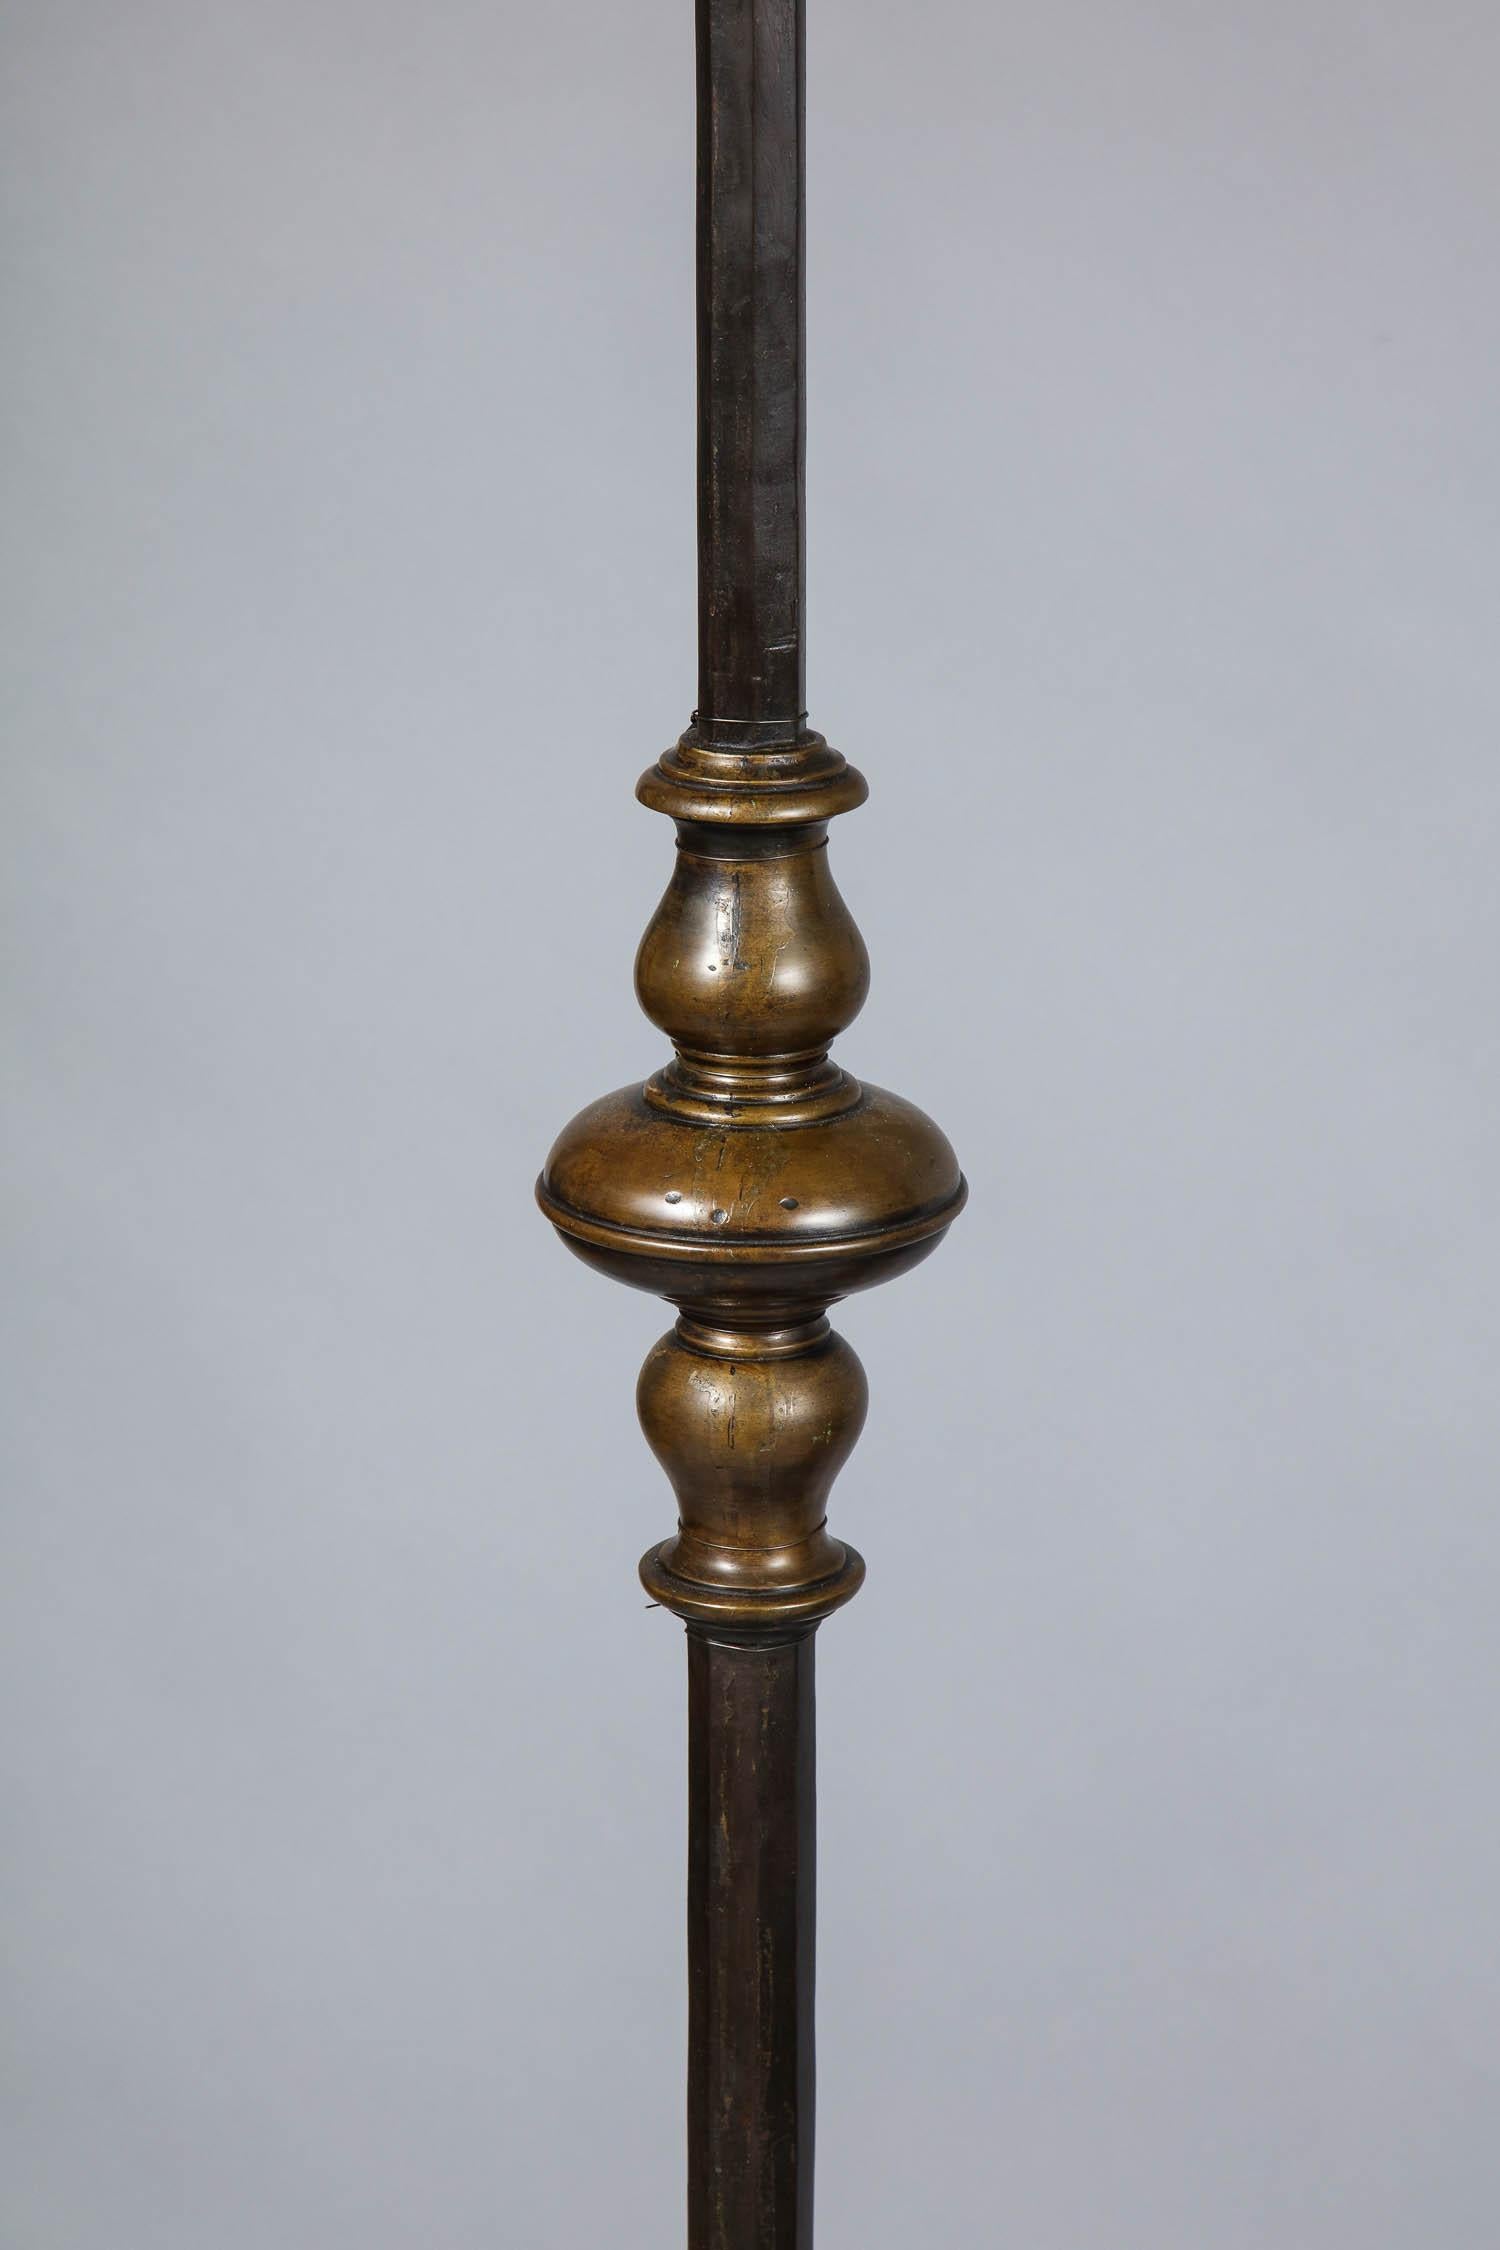 North American Massive Pair of Wrought Iron and Bronze Floor Lamps